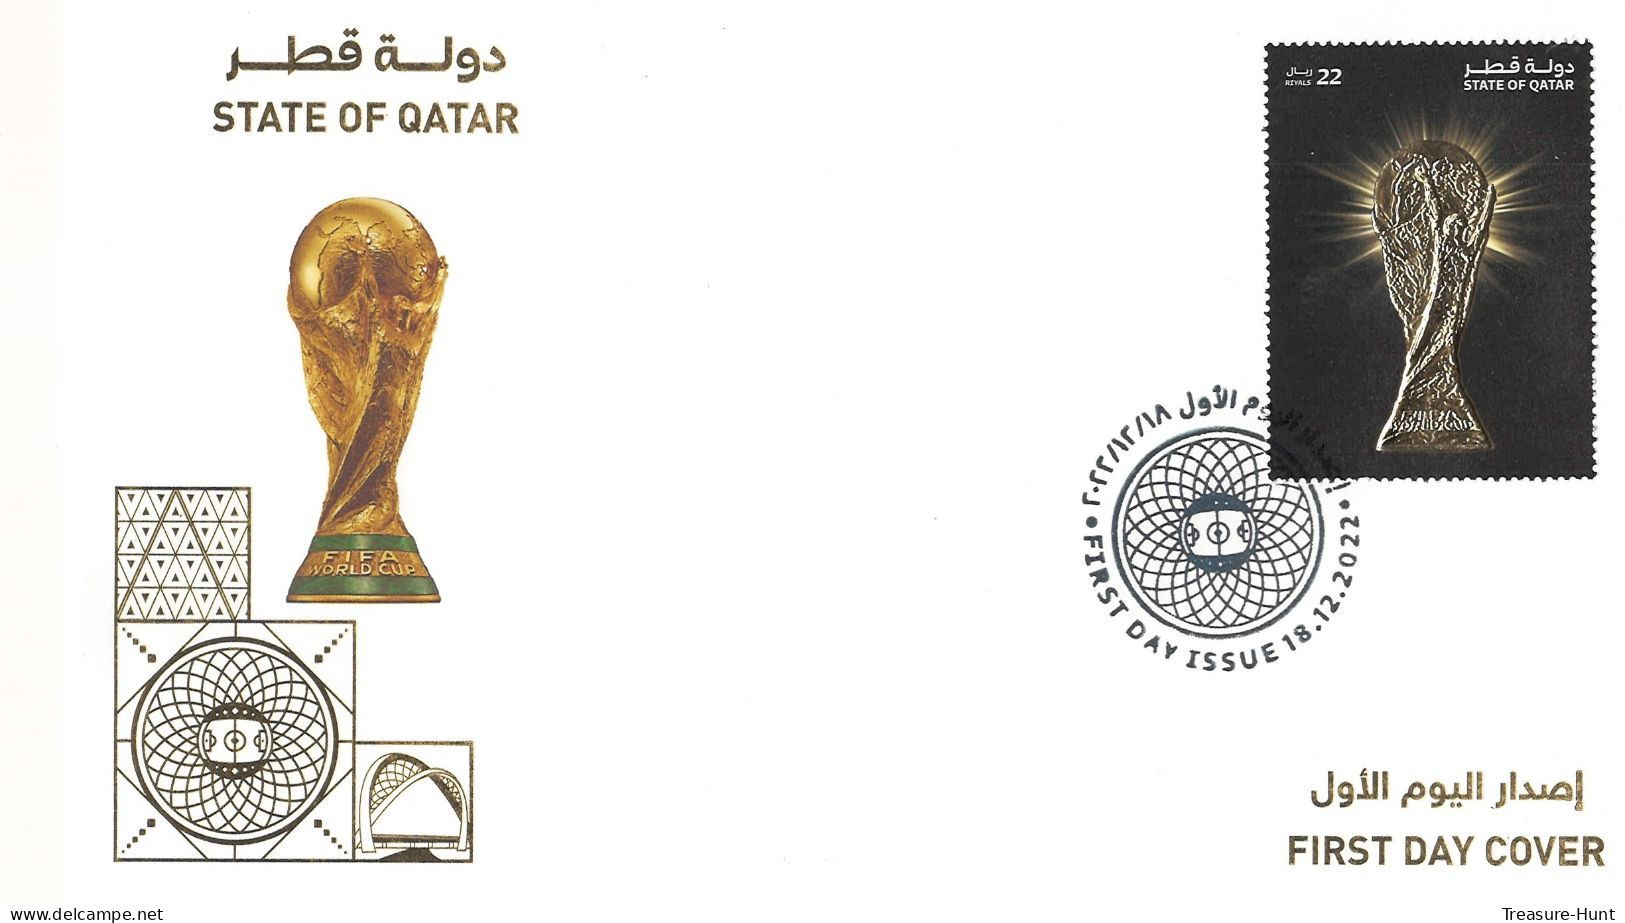 Complete Set Of First Day Covers - QATAR 2022 FIFA World Cup Soccer Football Championship - 11 Stamps Sets, 15 FDC's - 2022 – Qatar